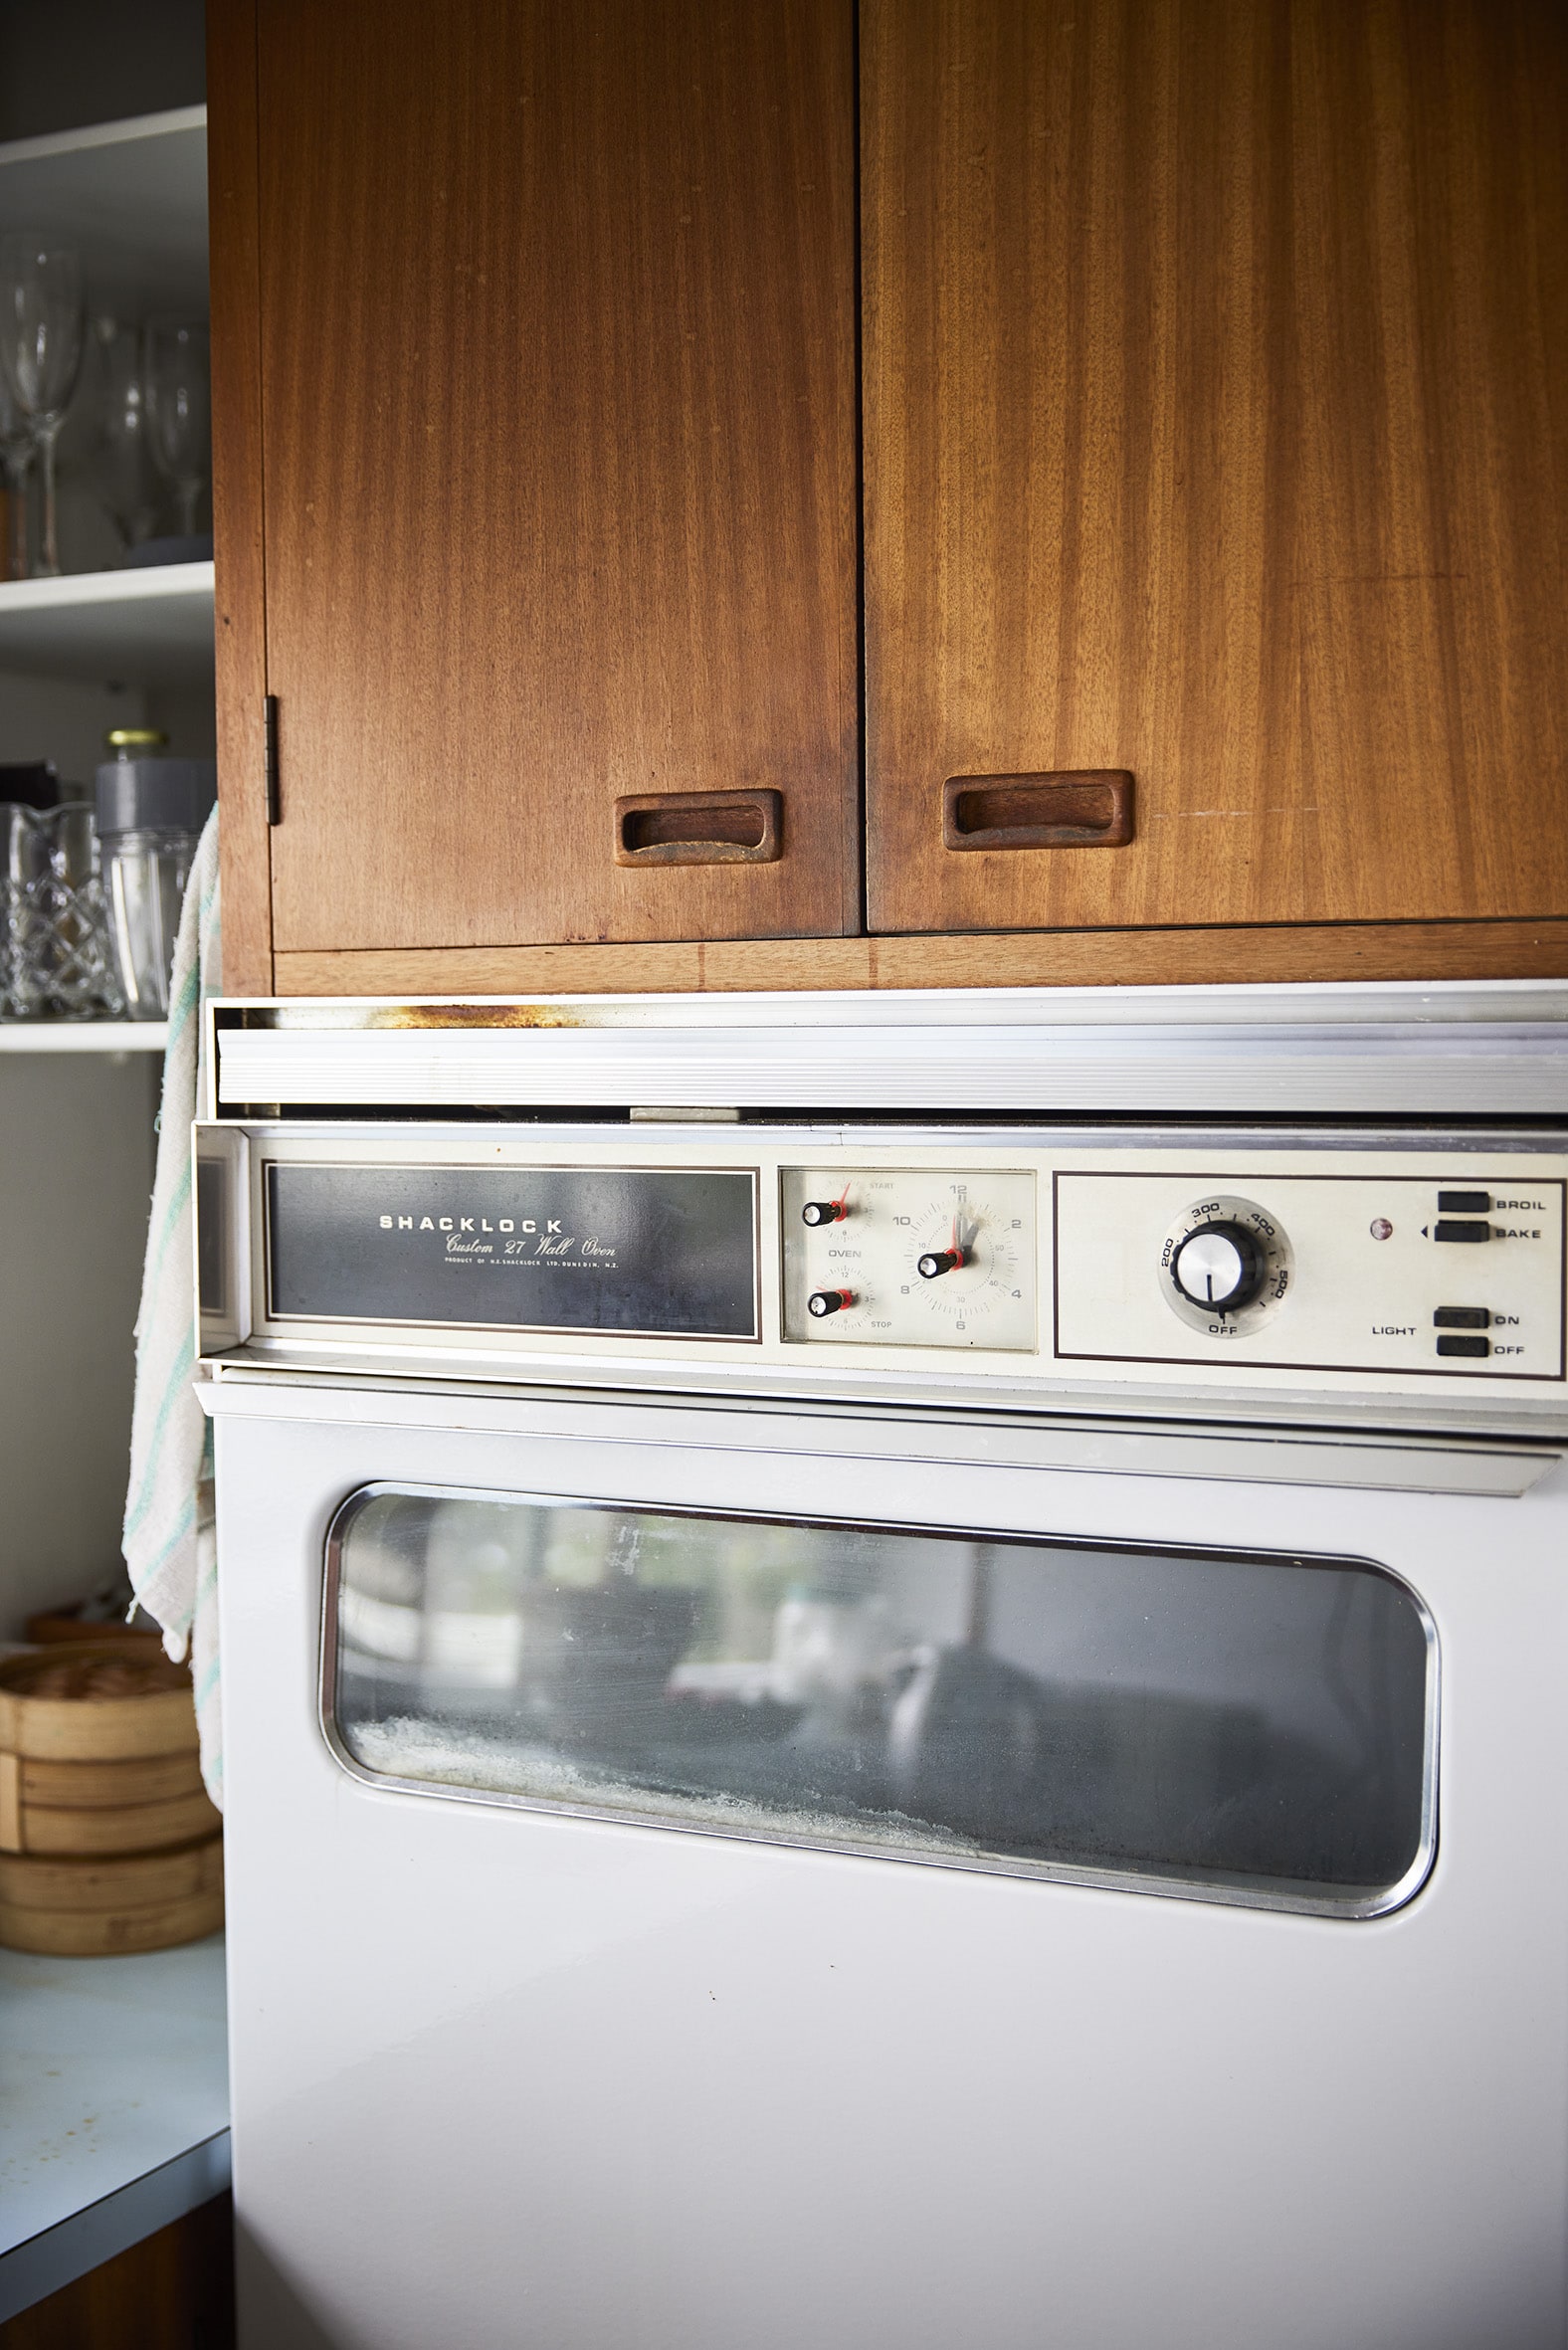 A mid-century white oven below wood panelled cabinets